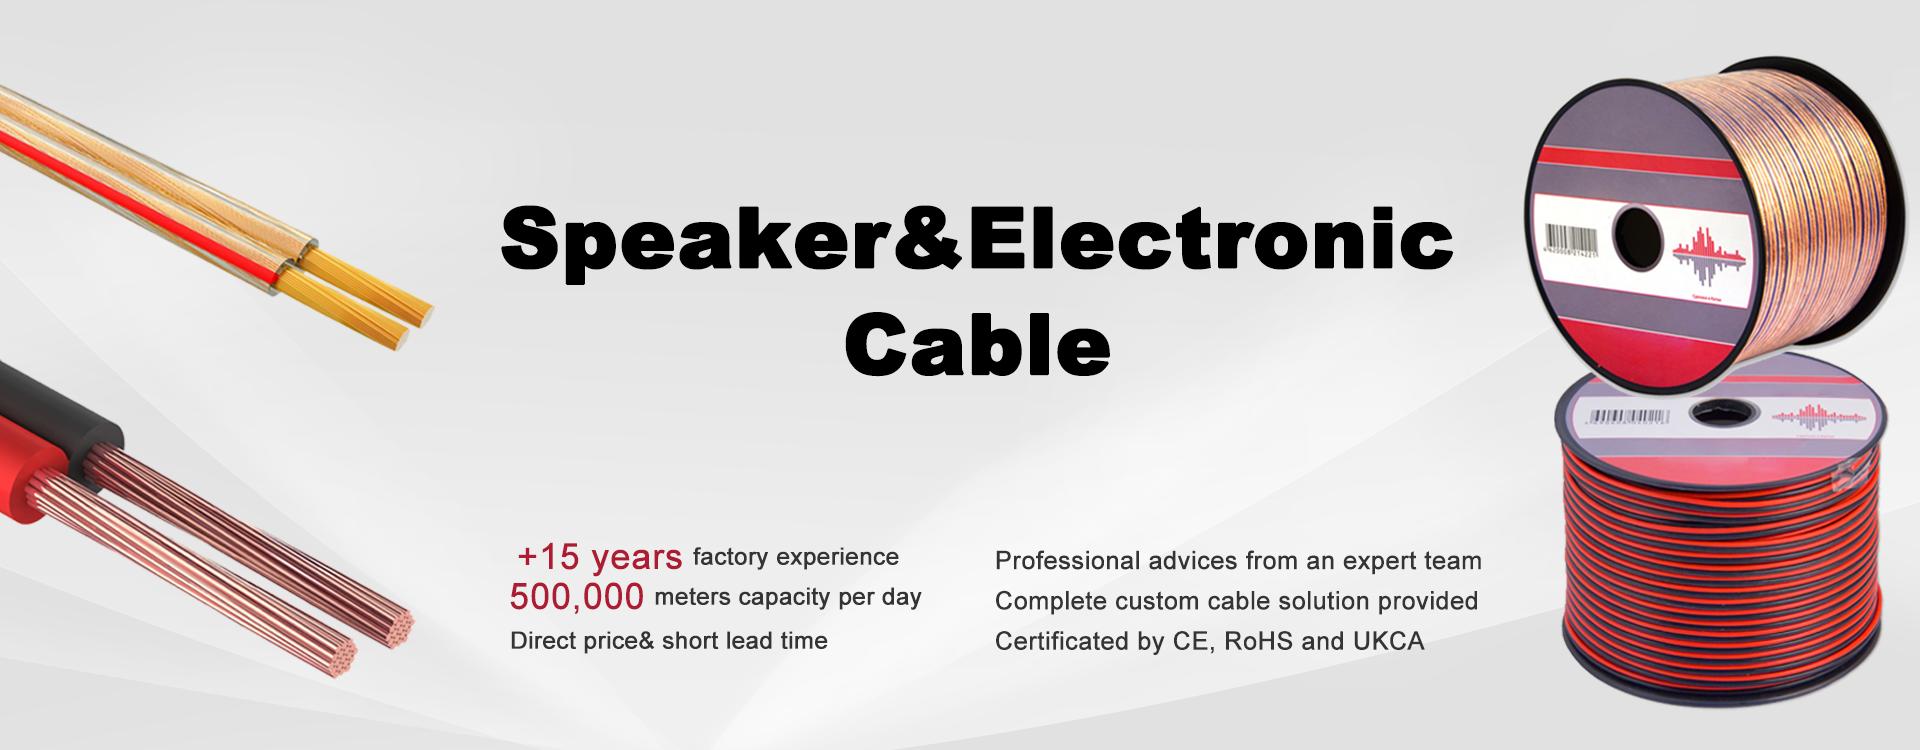 Speaker&Electronic Cable